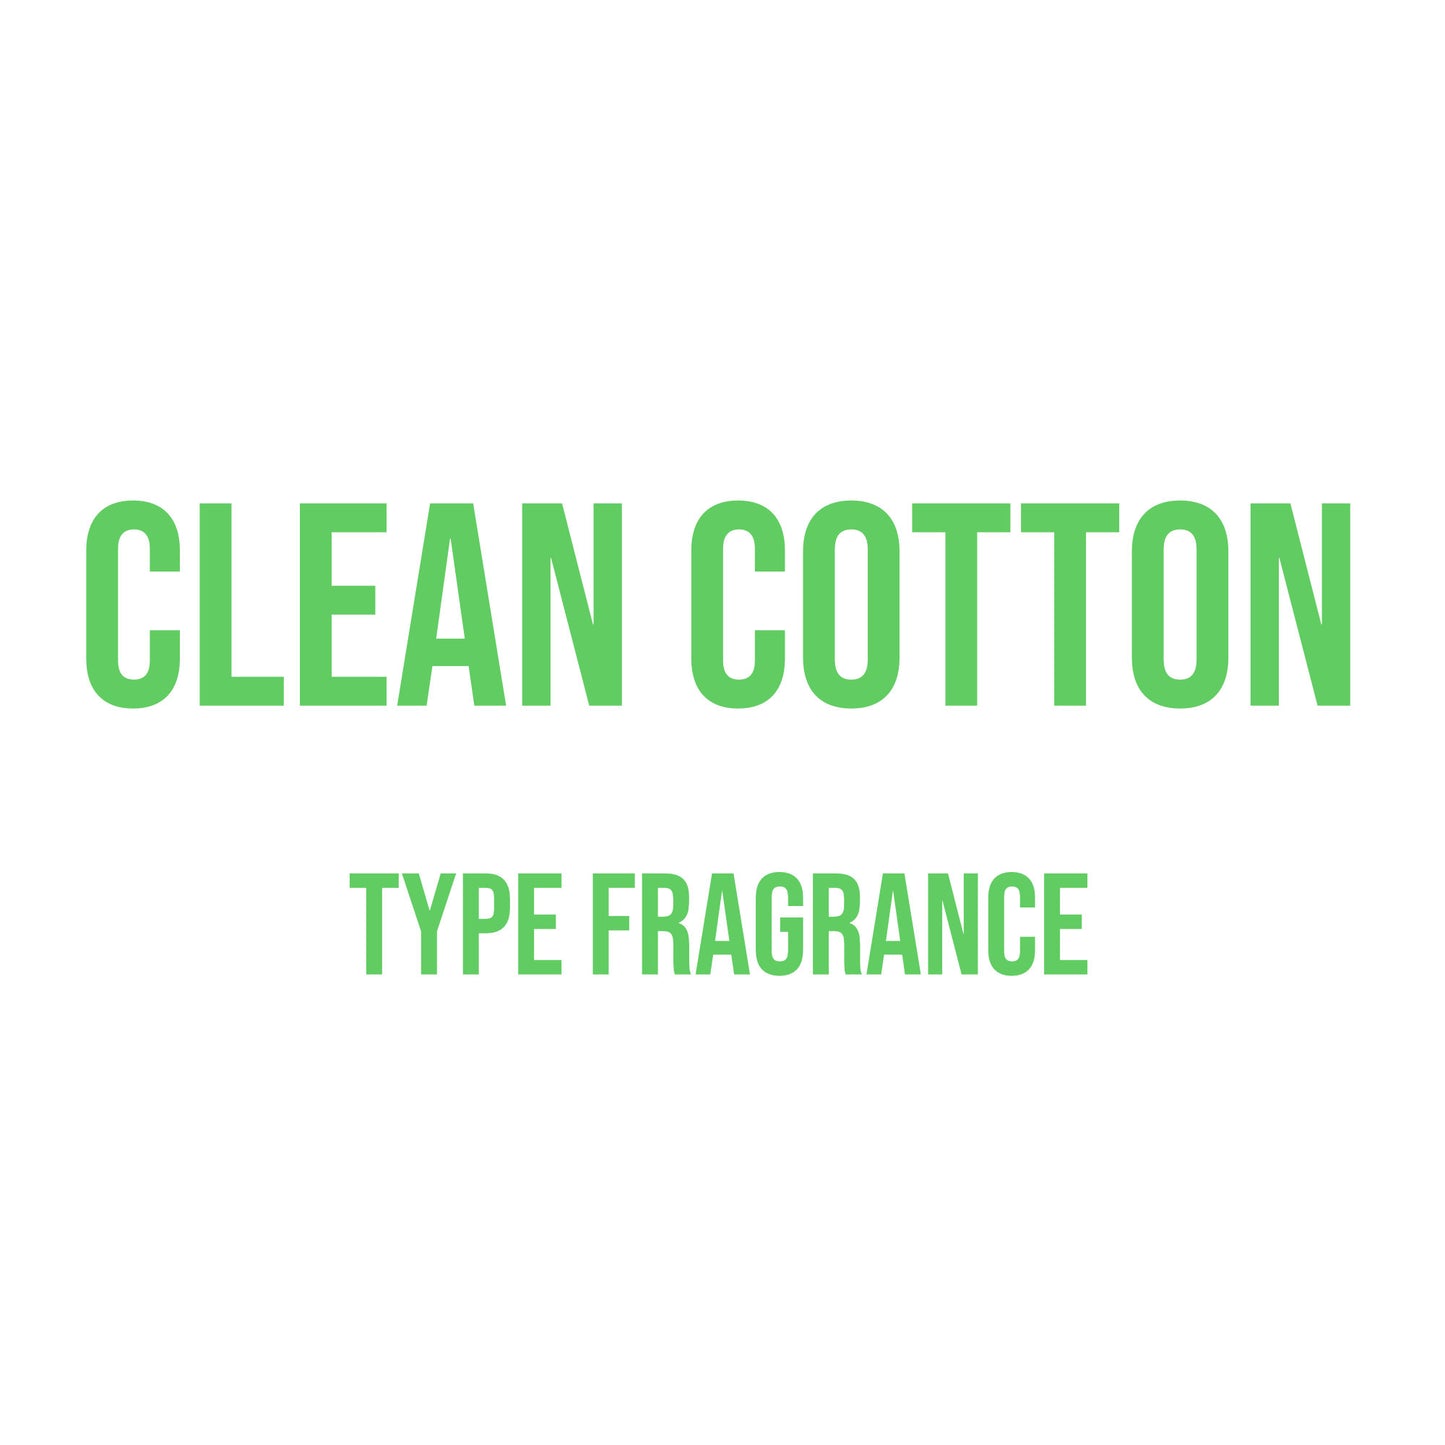 Clean Cotton Type Fragrance